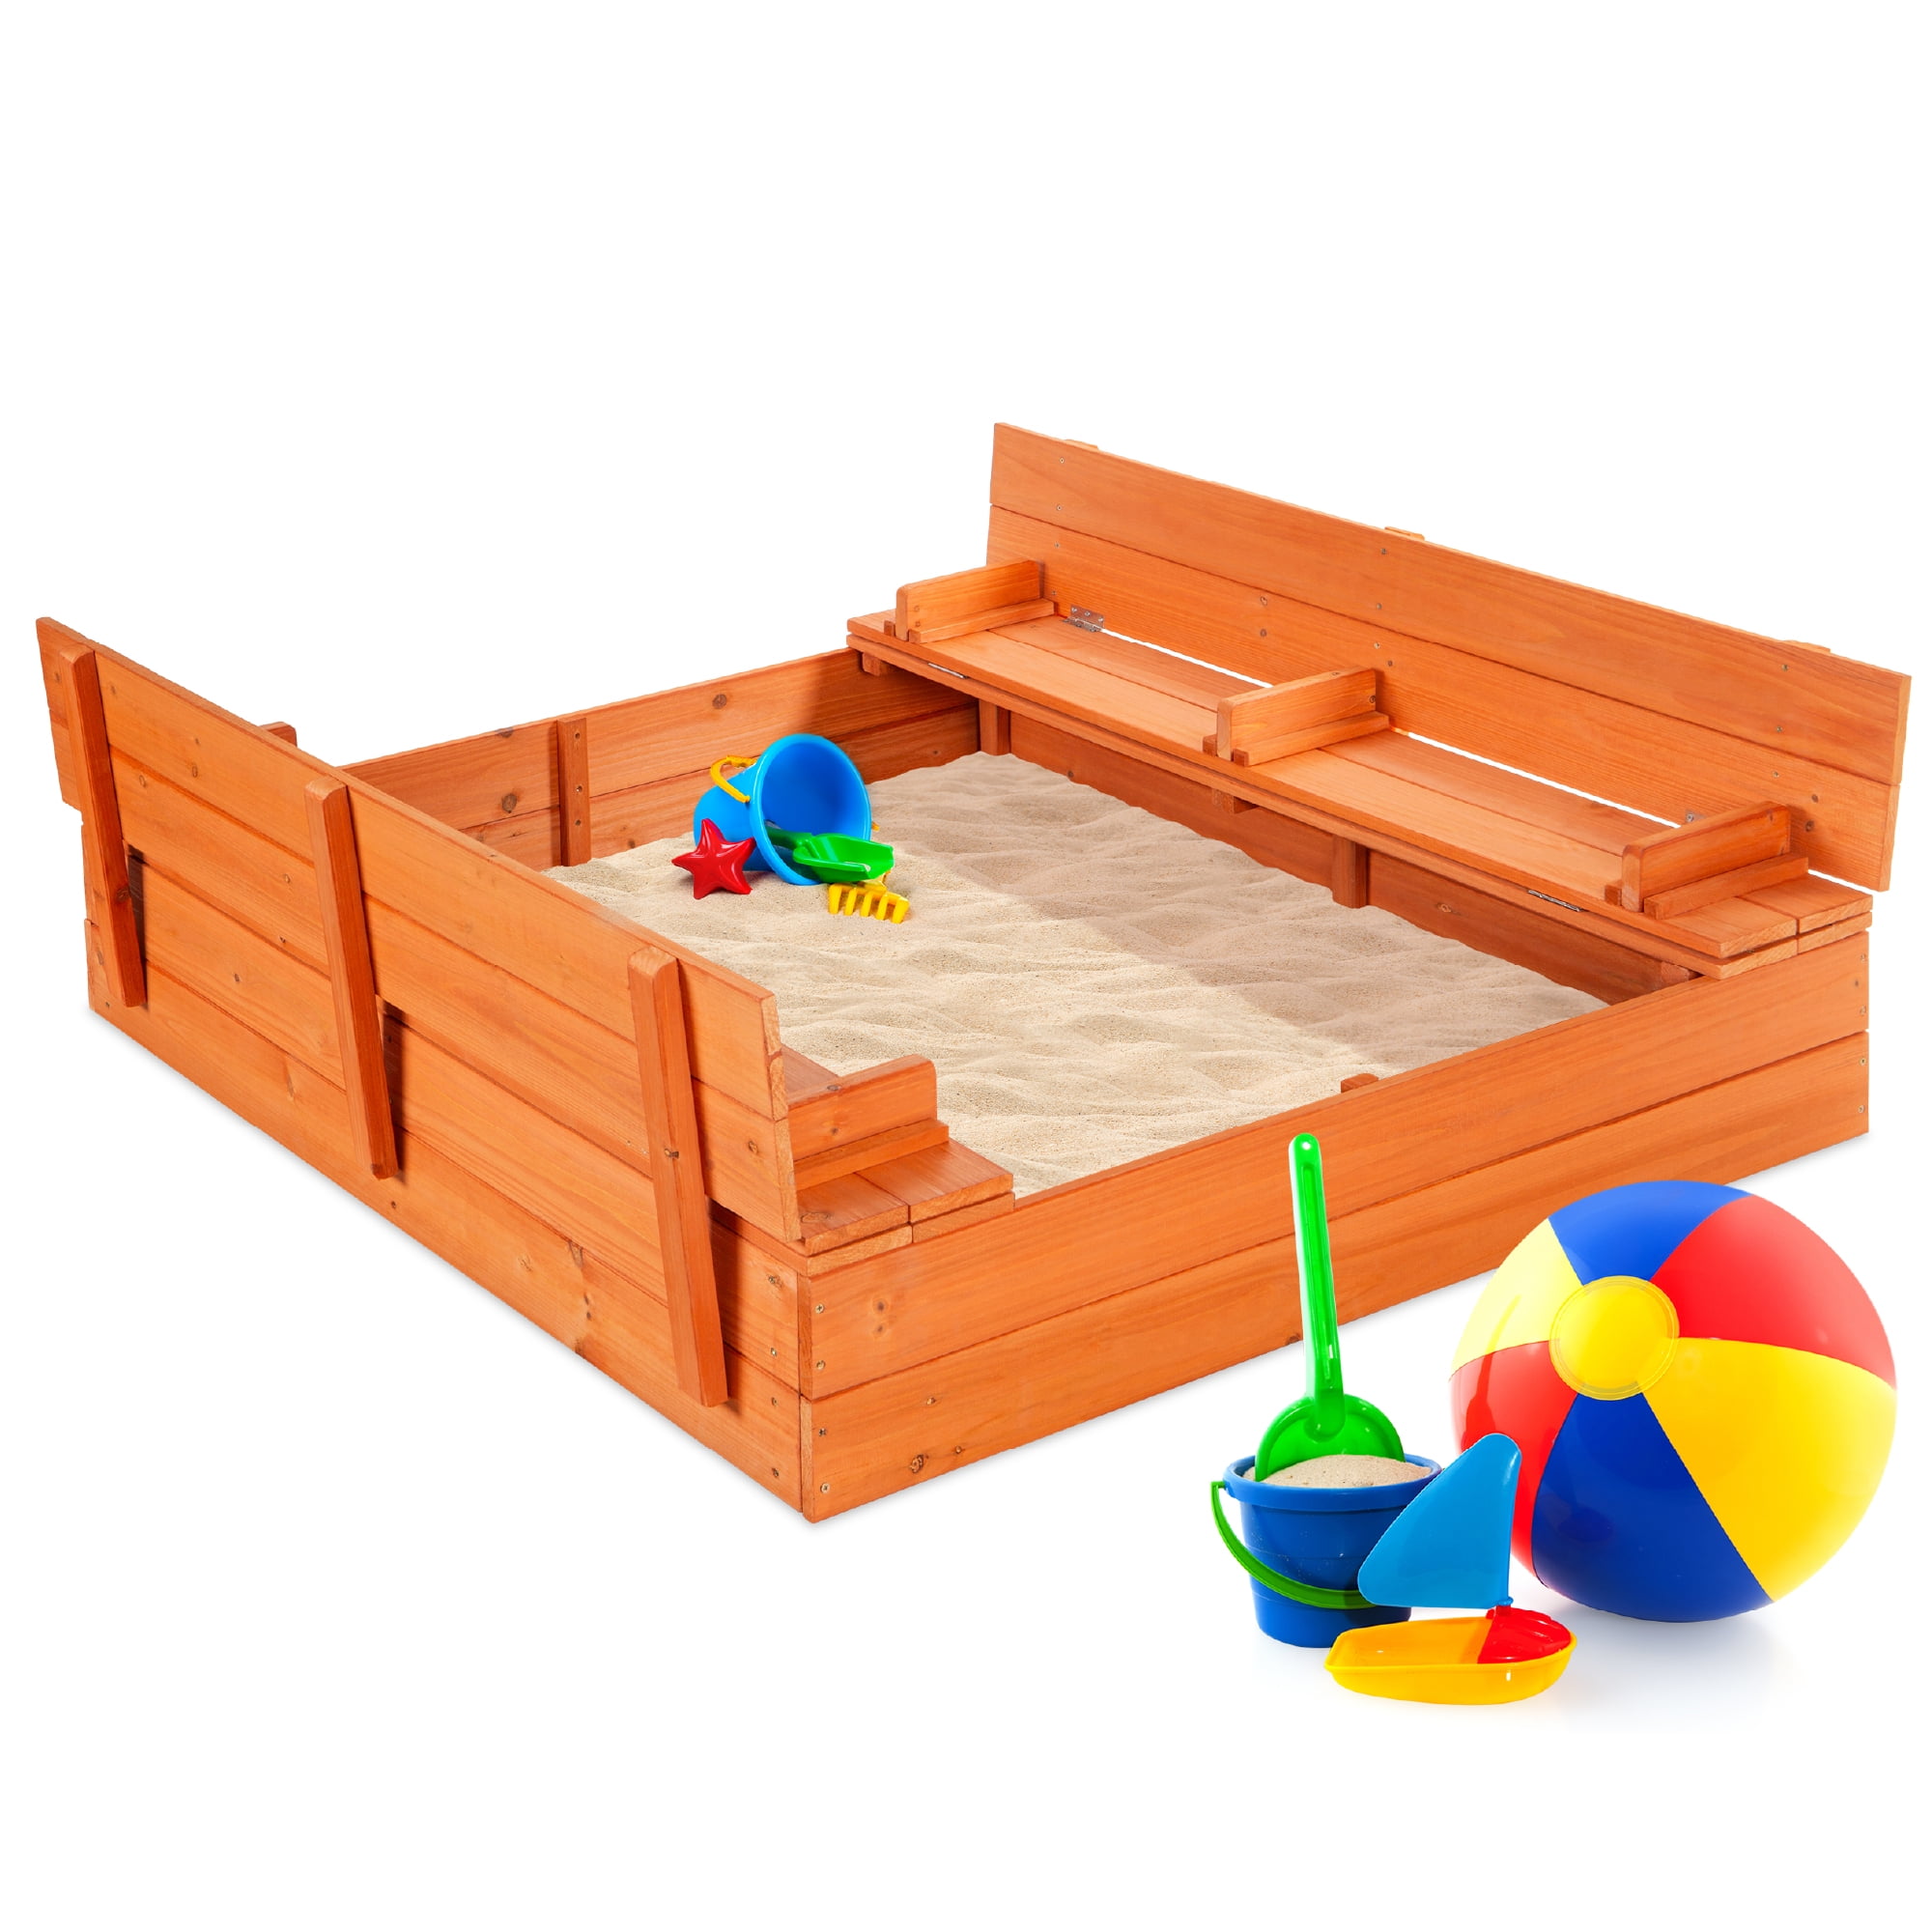 COZUHAUSE Wooden Outdoor Kids Sand Boxes with Foldable Bench Seat,Liftable Roof,47x47Inch 